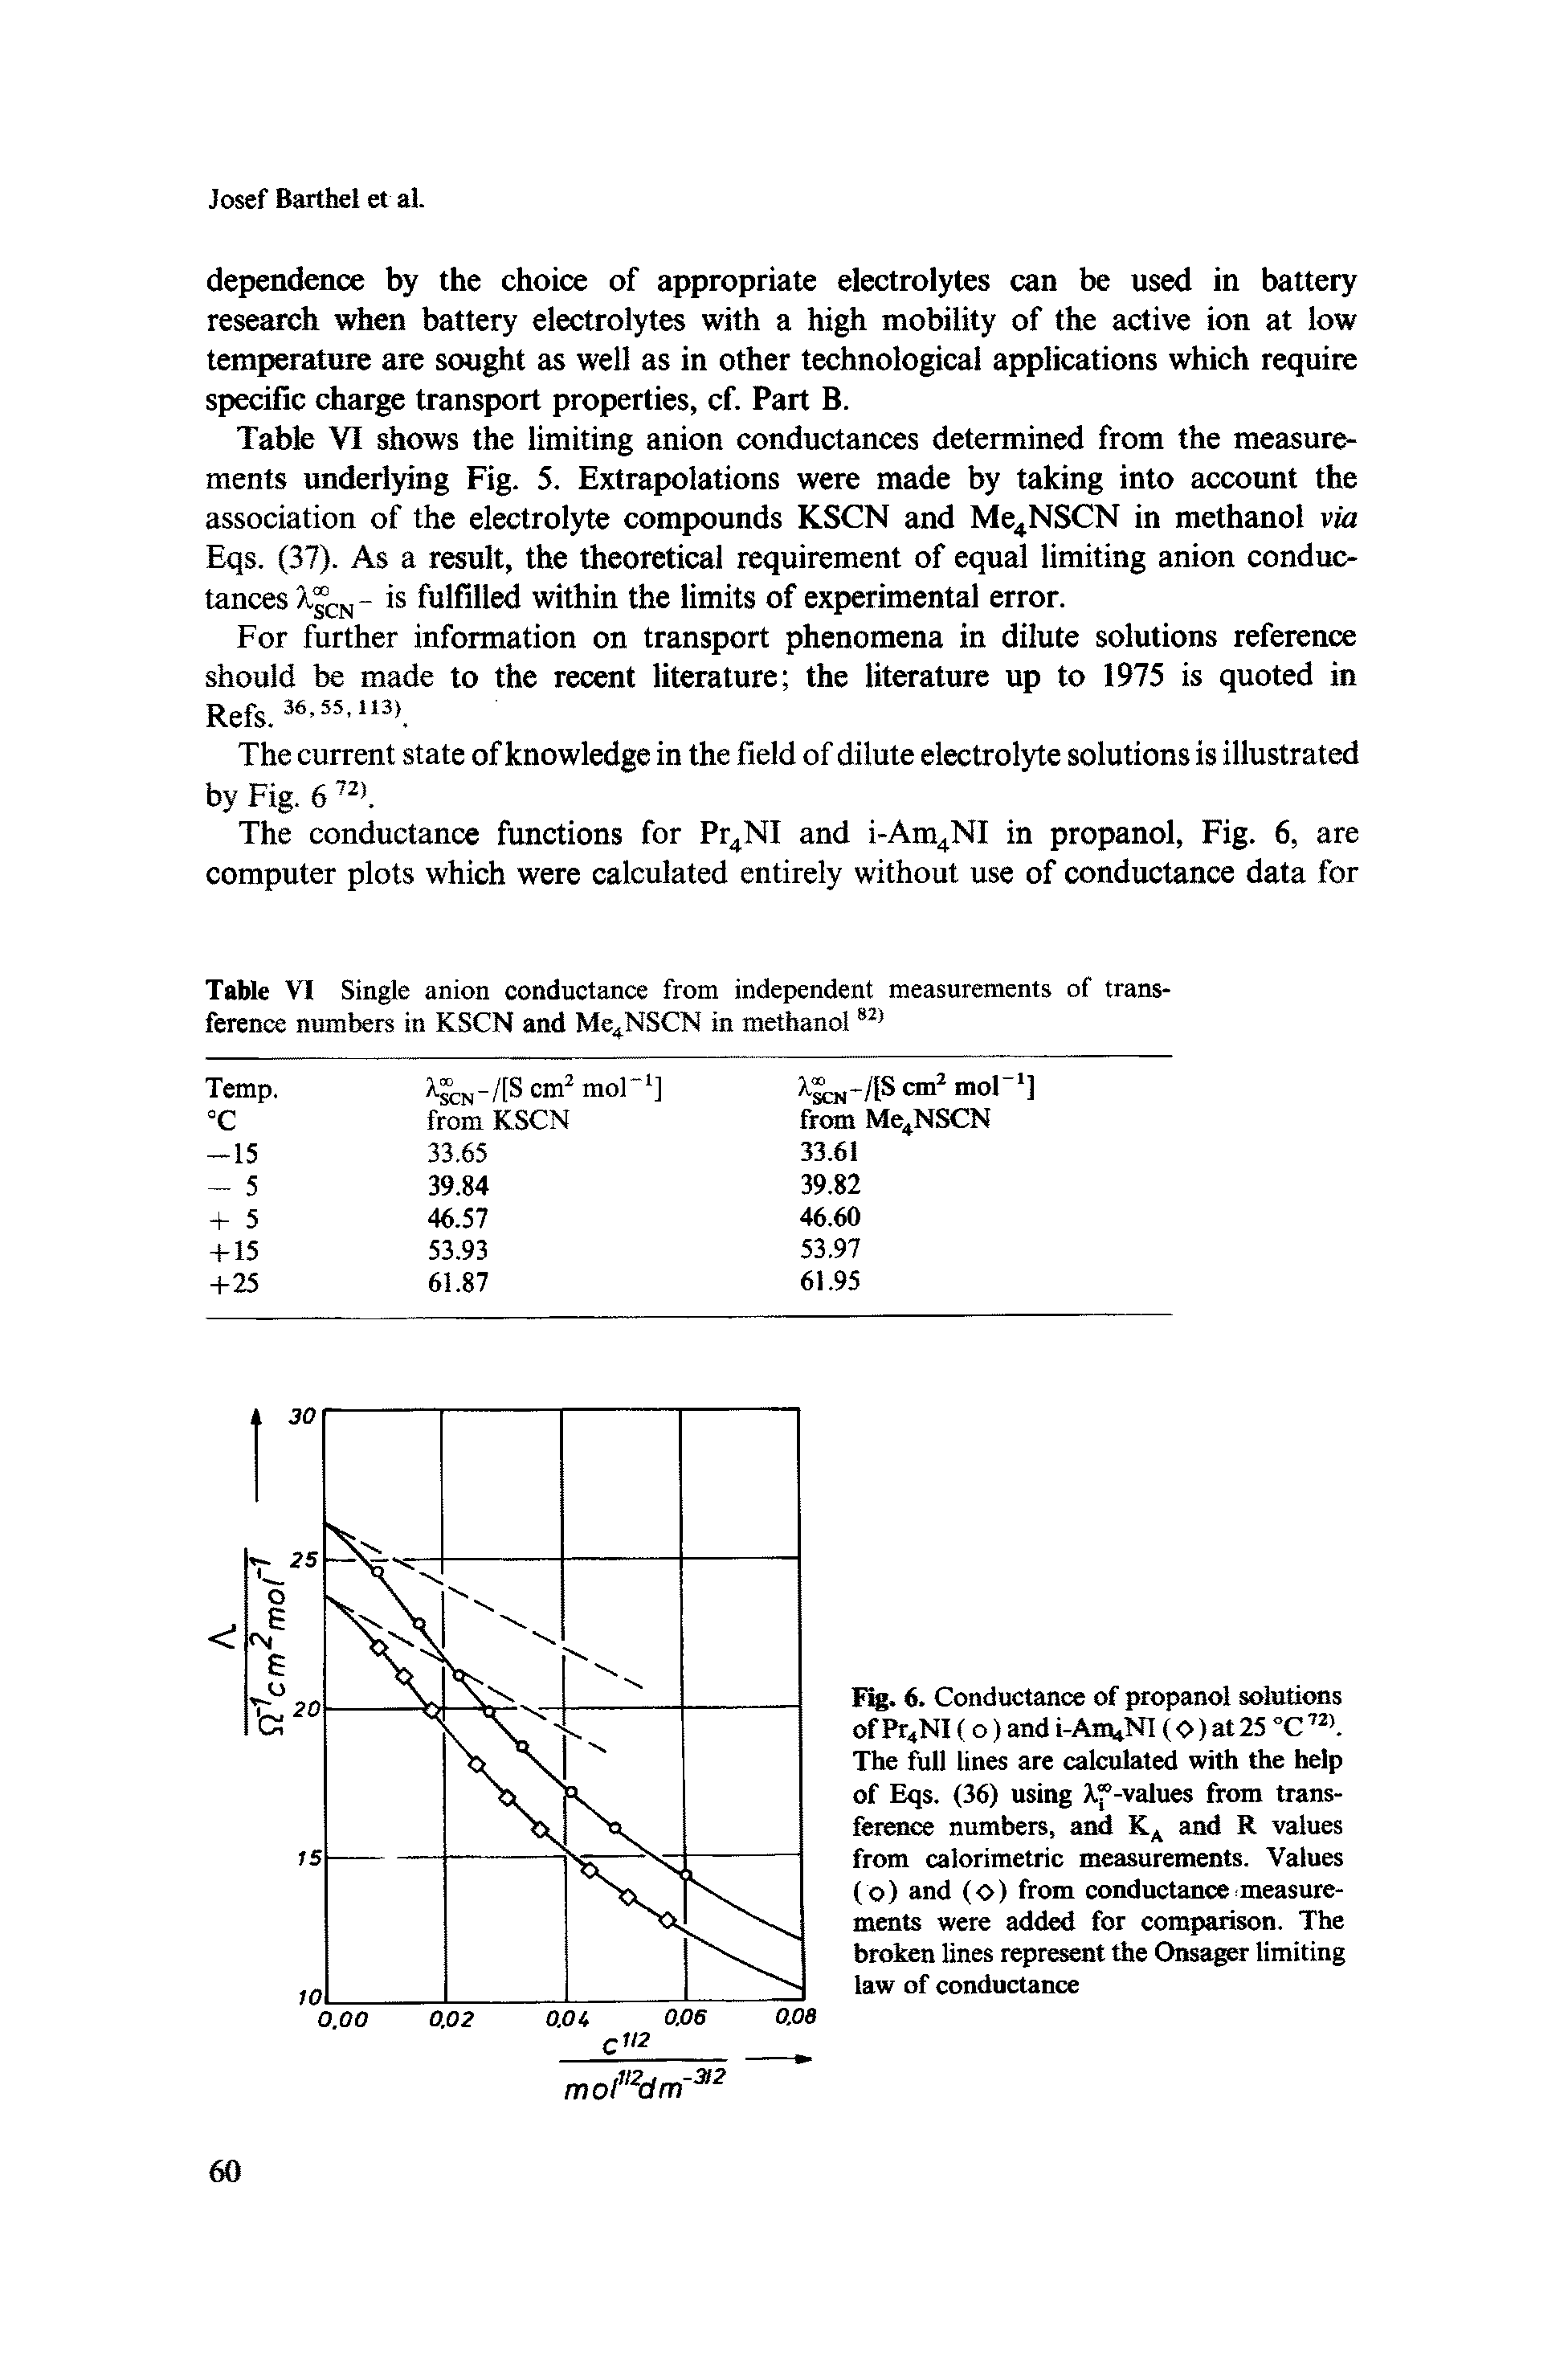 Table VI shows the limiting anion conductances determined from the measurements underlying Fig. 5. Extrapolations were made by taking into account the association of the electrolyte compounds KSCN and Mc4NSCN in methanol via Eqs. (37). As a result, the theoretical requirement of equal limiting anion conductances is fulfilled within the limits of experimental error.